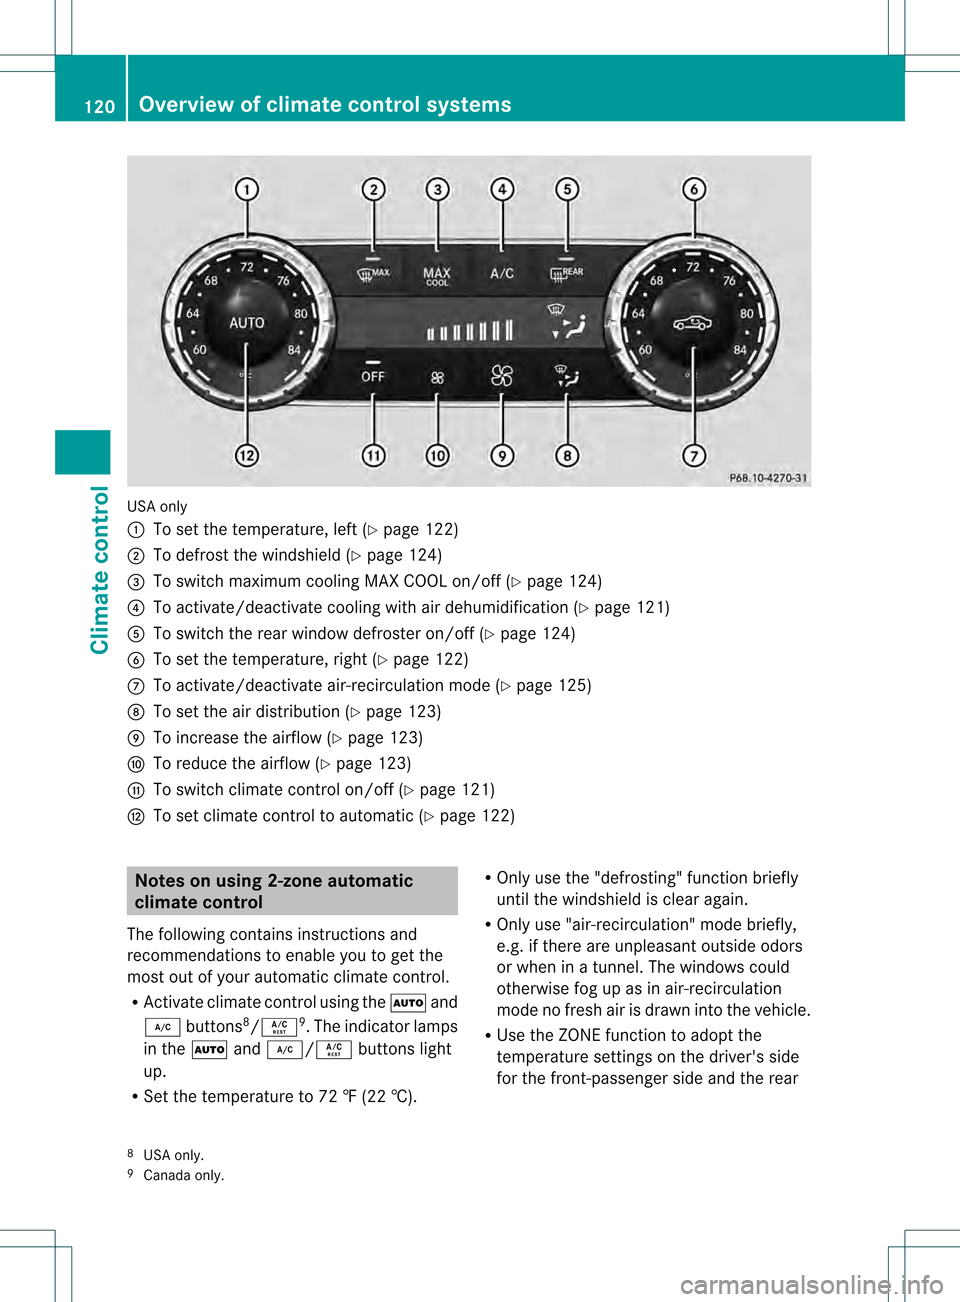 MERCEDES-BENZ SLK55AMG 2012 R172 Owners Manual USA only
0002
To set the temperature, left (Y page 122)
0003 To defrost the windshield (Y page 124)
0023 To switch maximum cooling MAX COOL on/off (Y page 124)
0022 To activate/deactivate cooling with